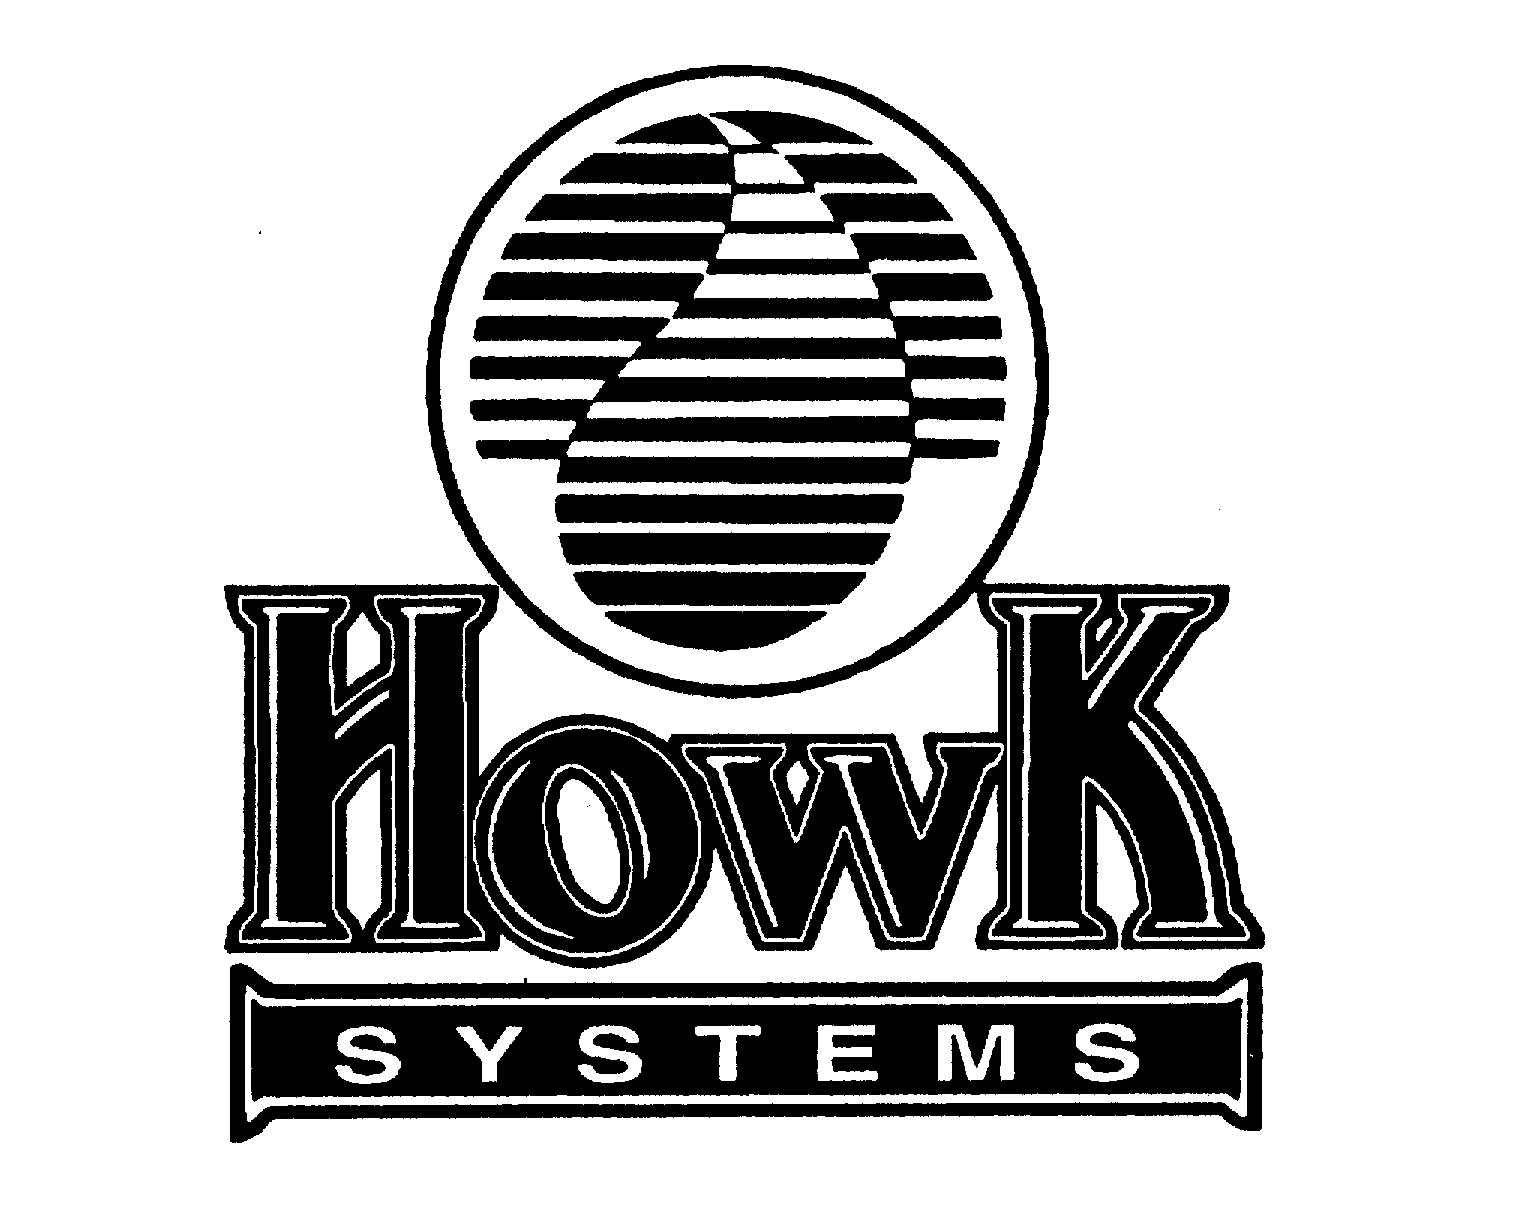  HOWK SYSTEMS